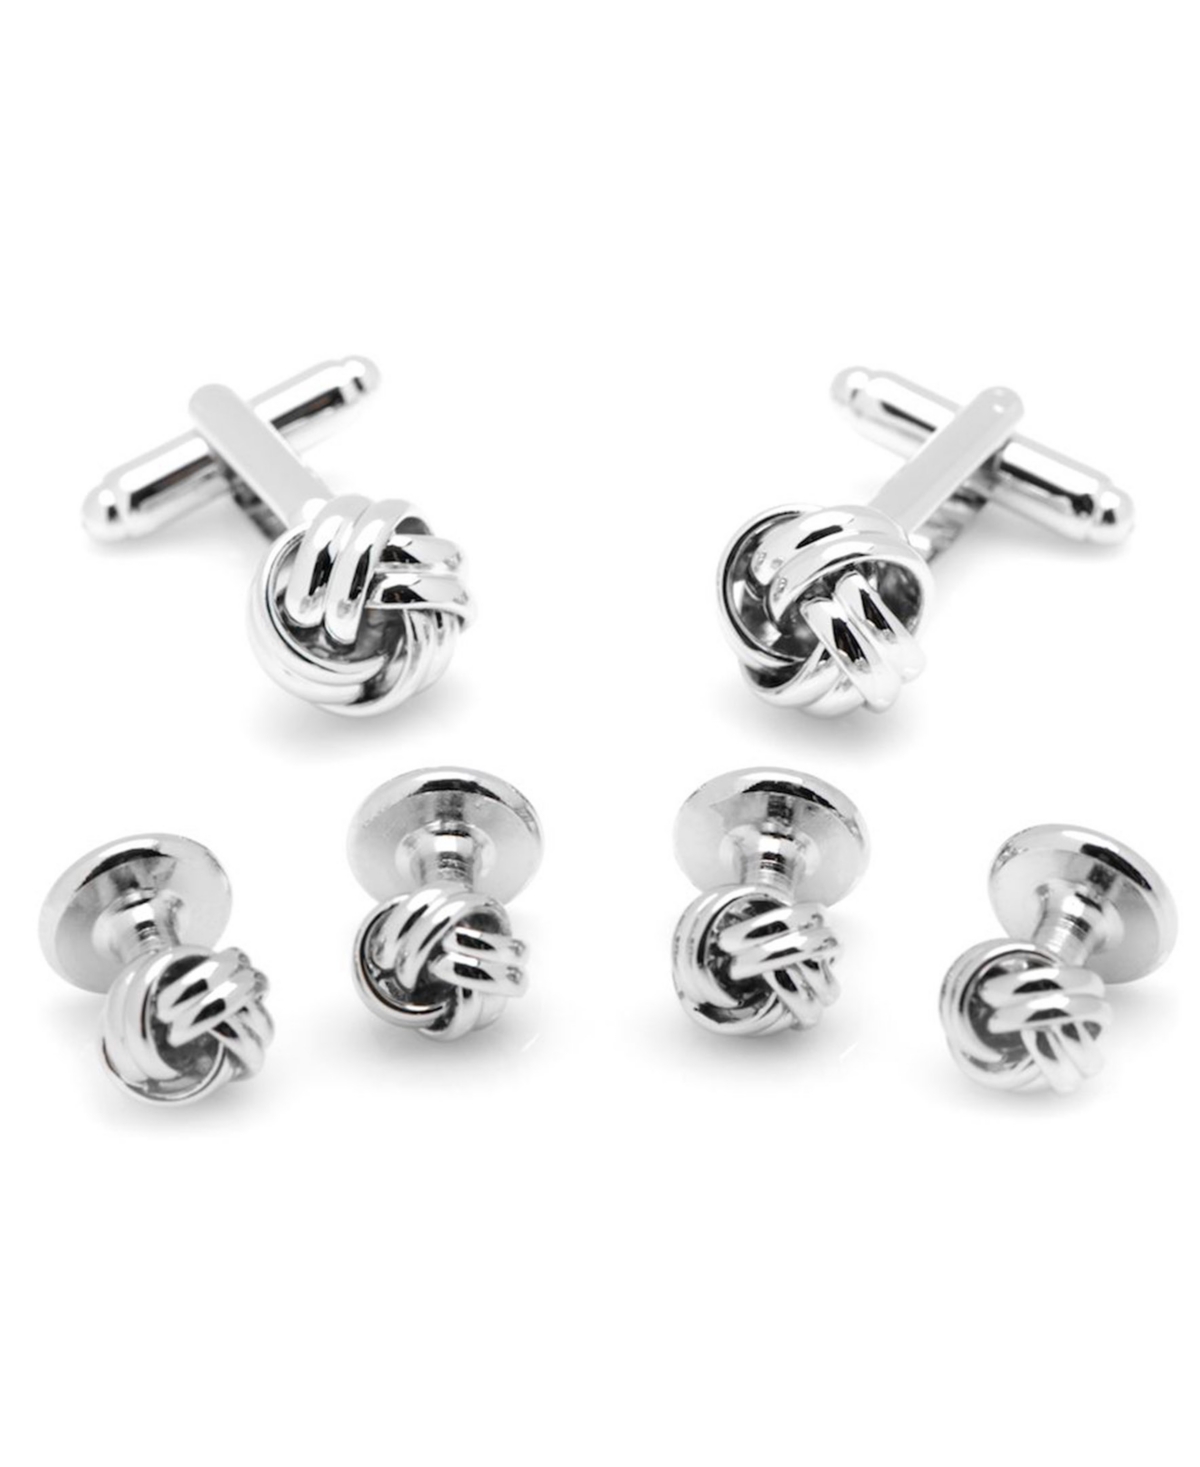 Men's Knot Cufflink and Stud Set - Silver-Tone